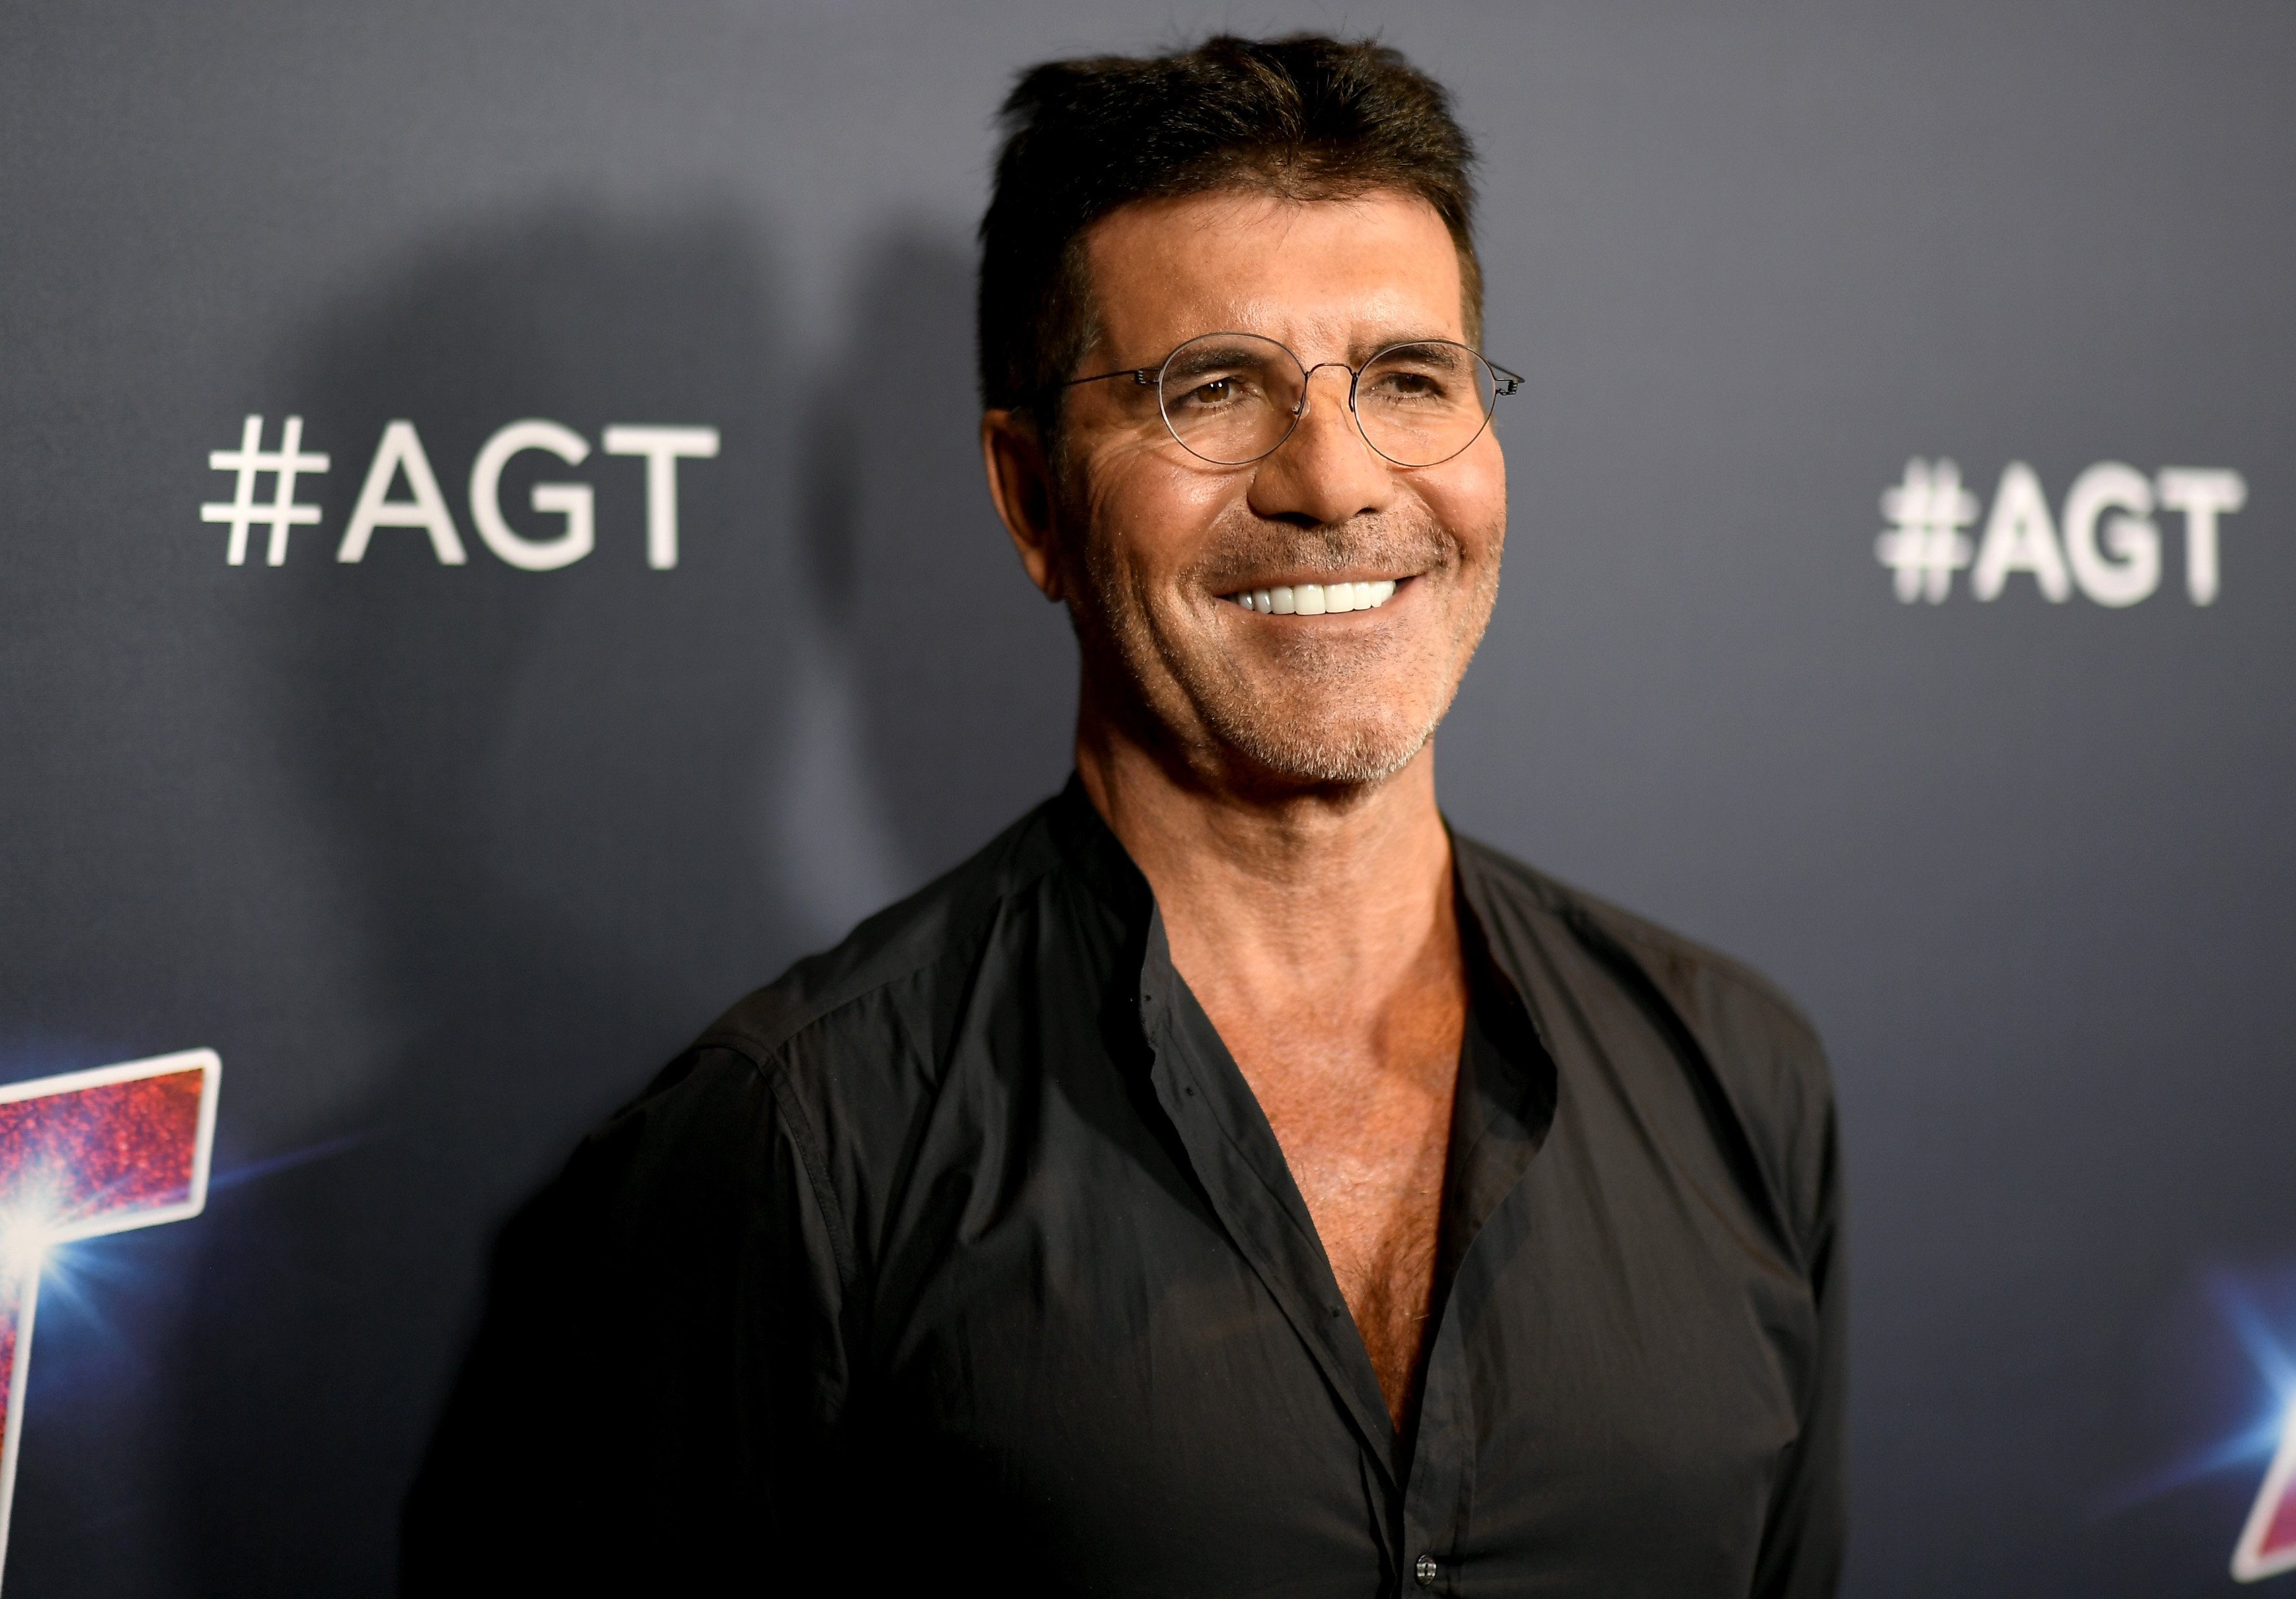 Simon Cowell attends "America's Got Talent" Season 14 Live Show Red Carpet on September 17, 2019, in Hollywood, California. | Source: Getty Images.